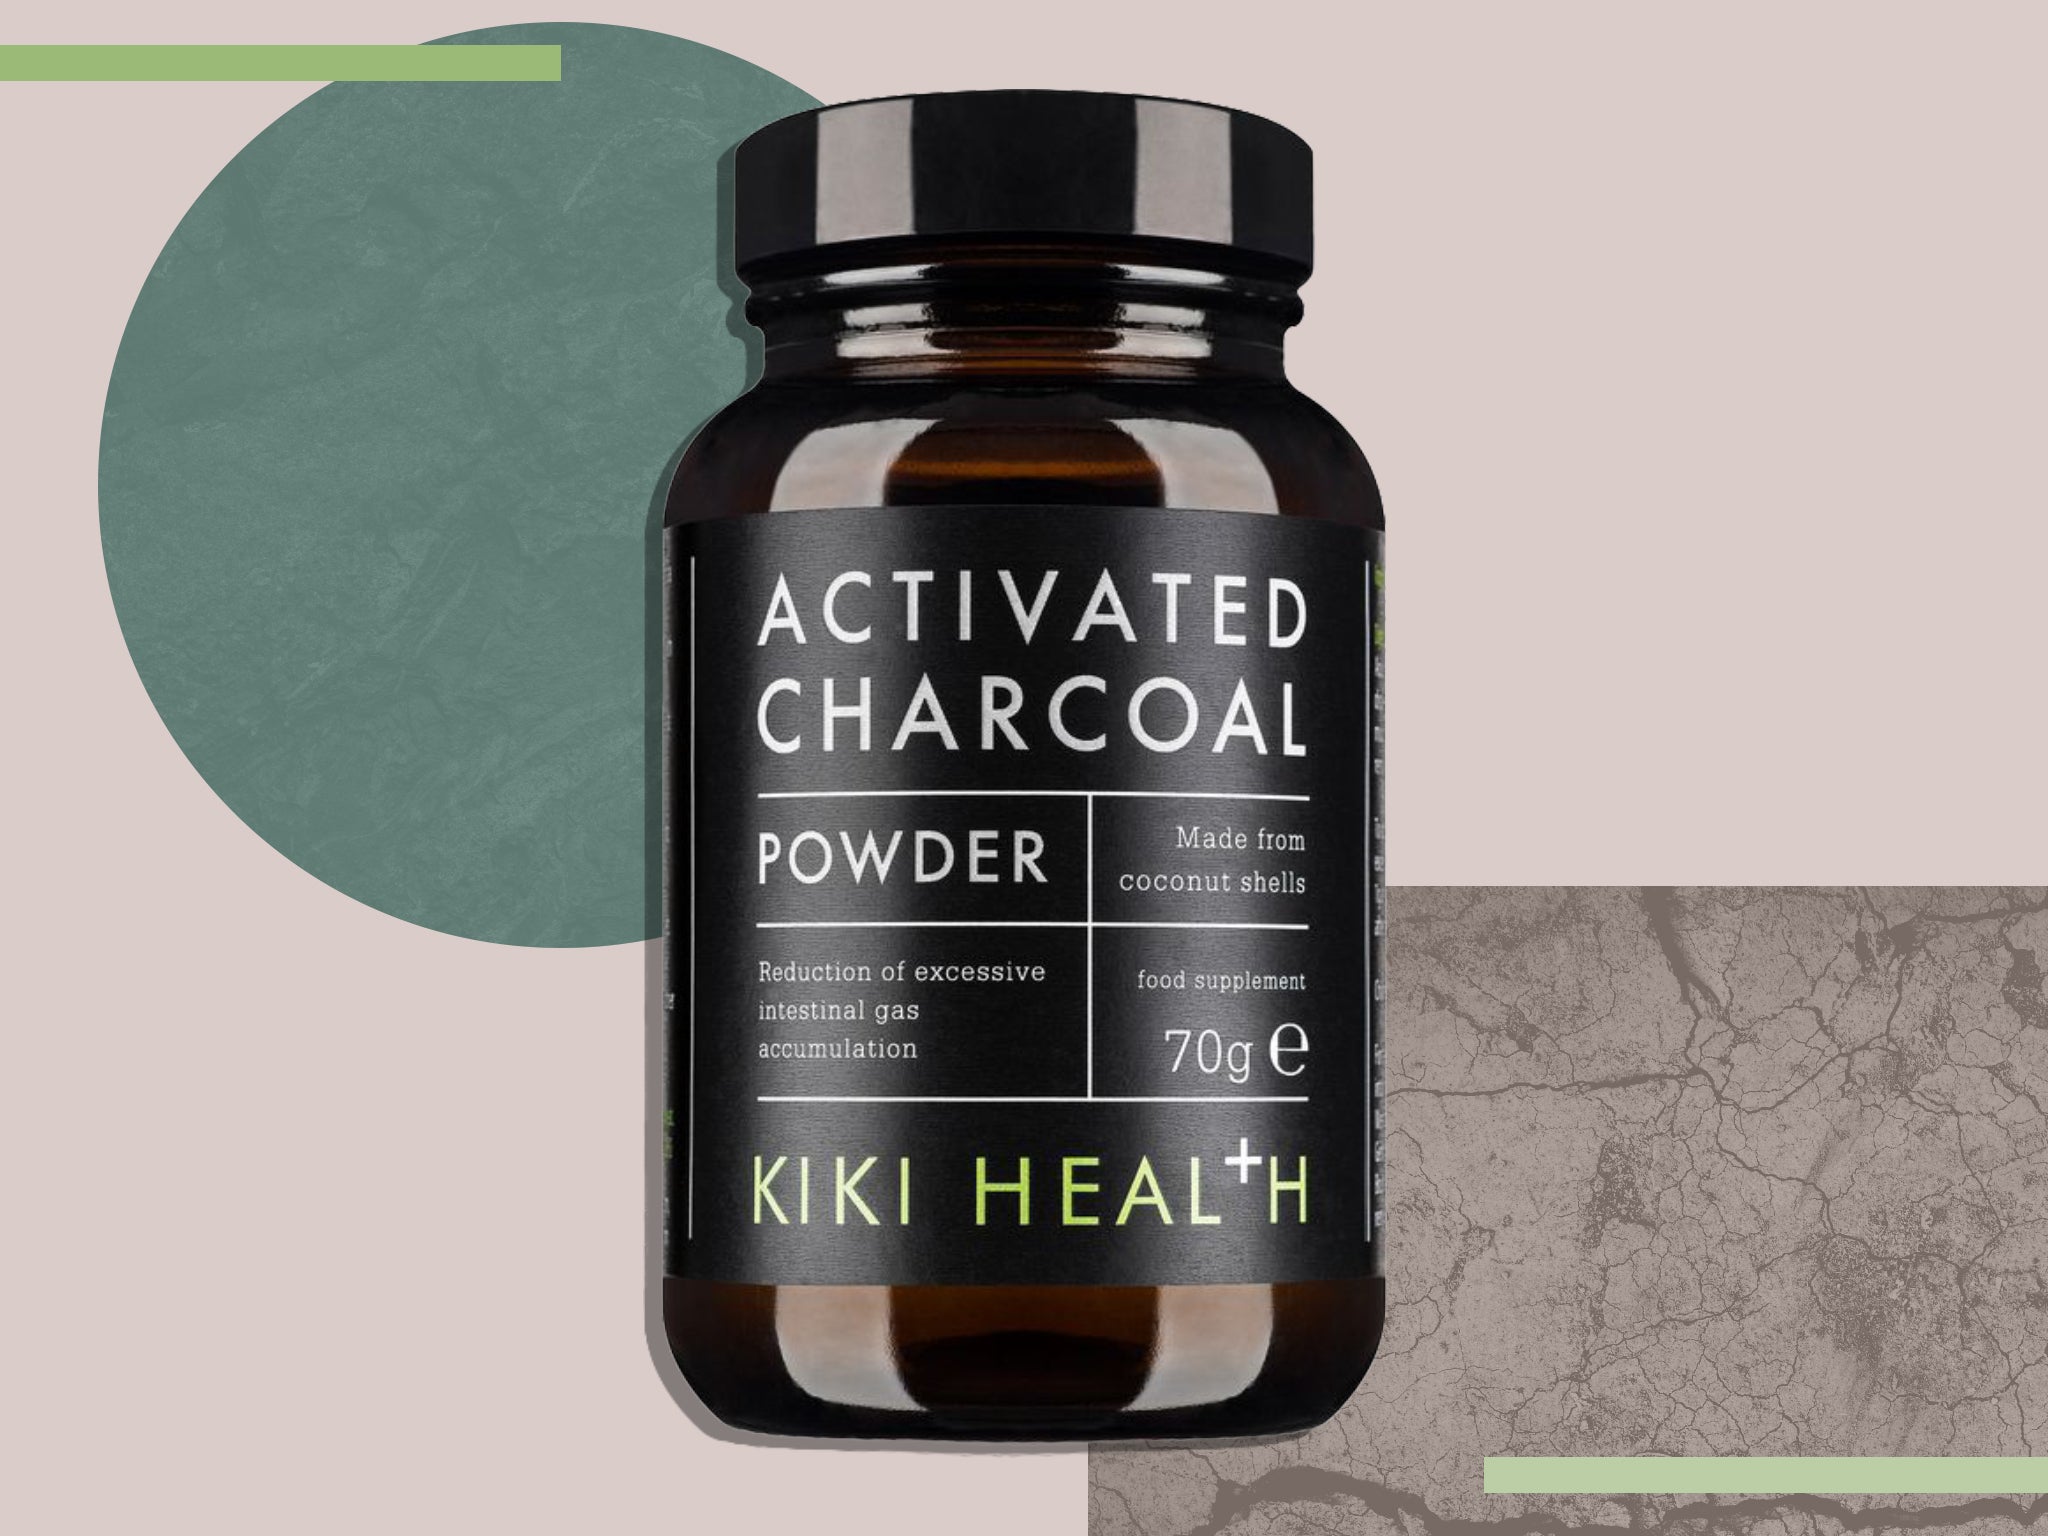 As charcoal absorbs toxins naturally, it can lift surface stains and can even soothe digestive issues when taken orally